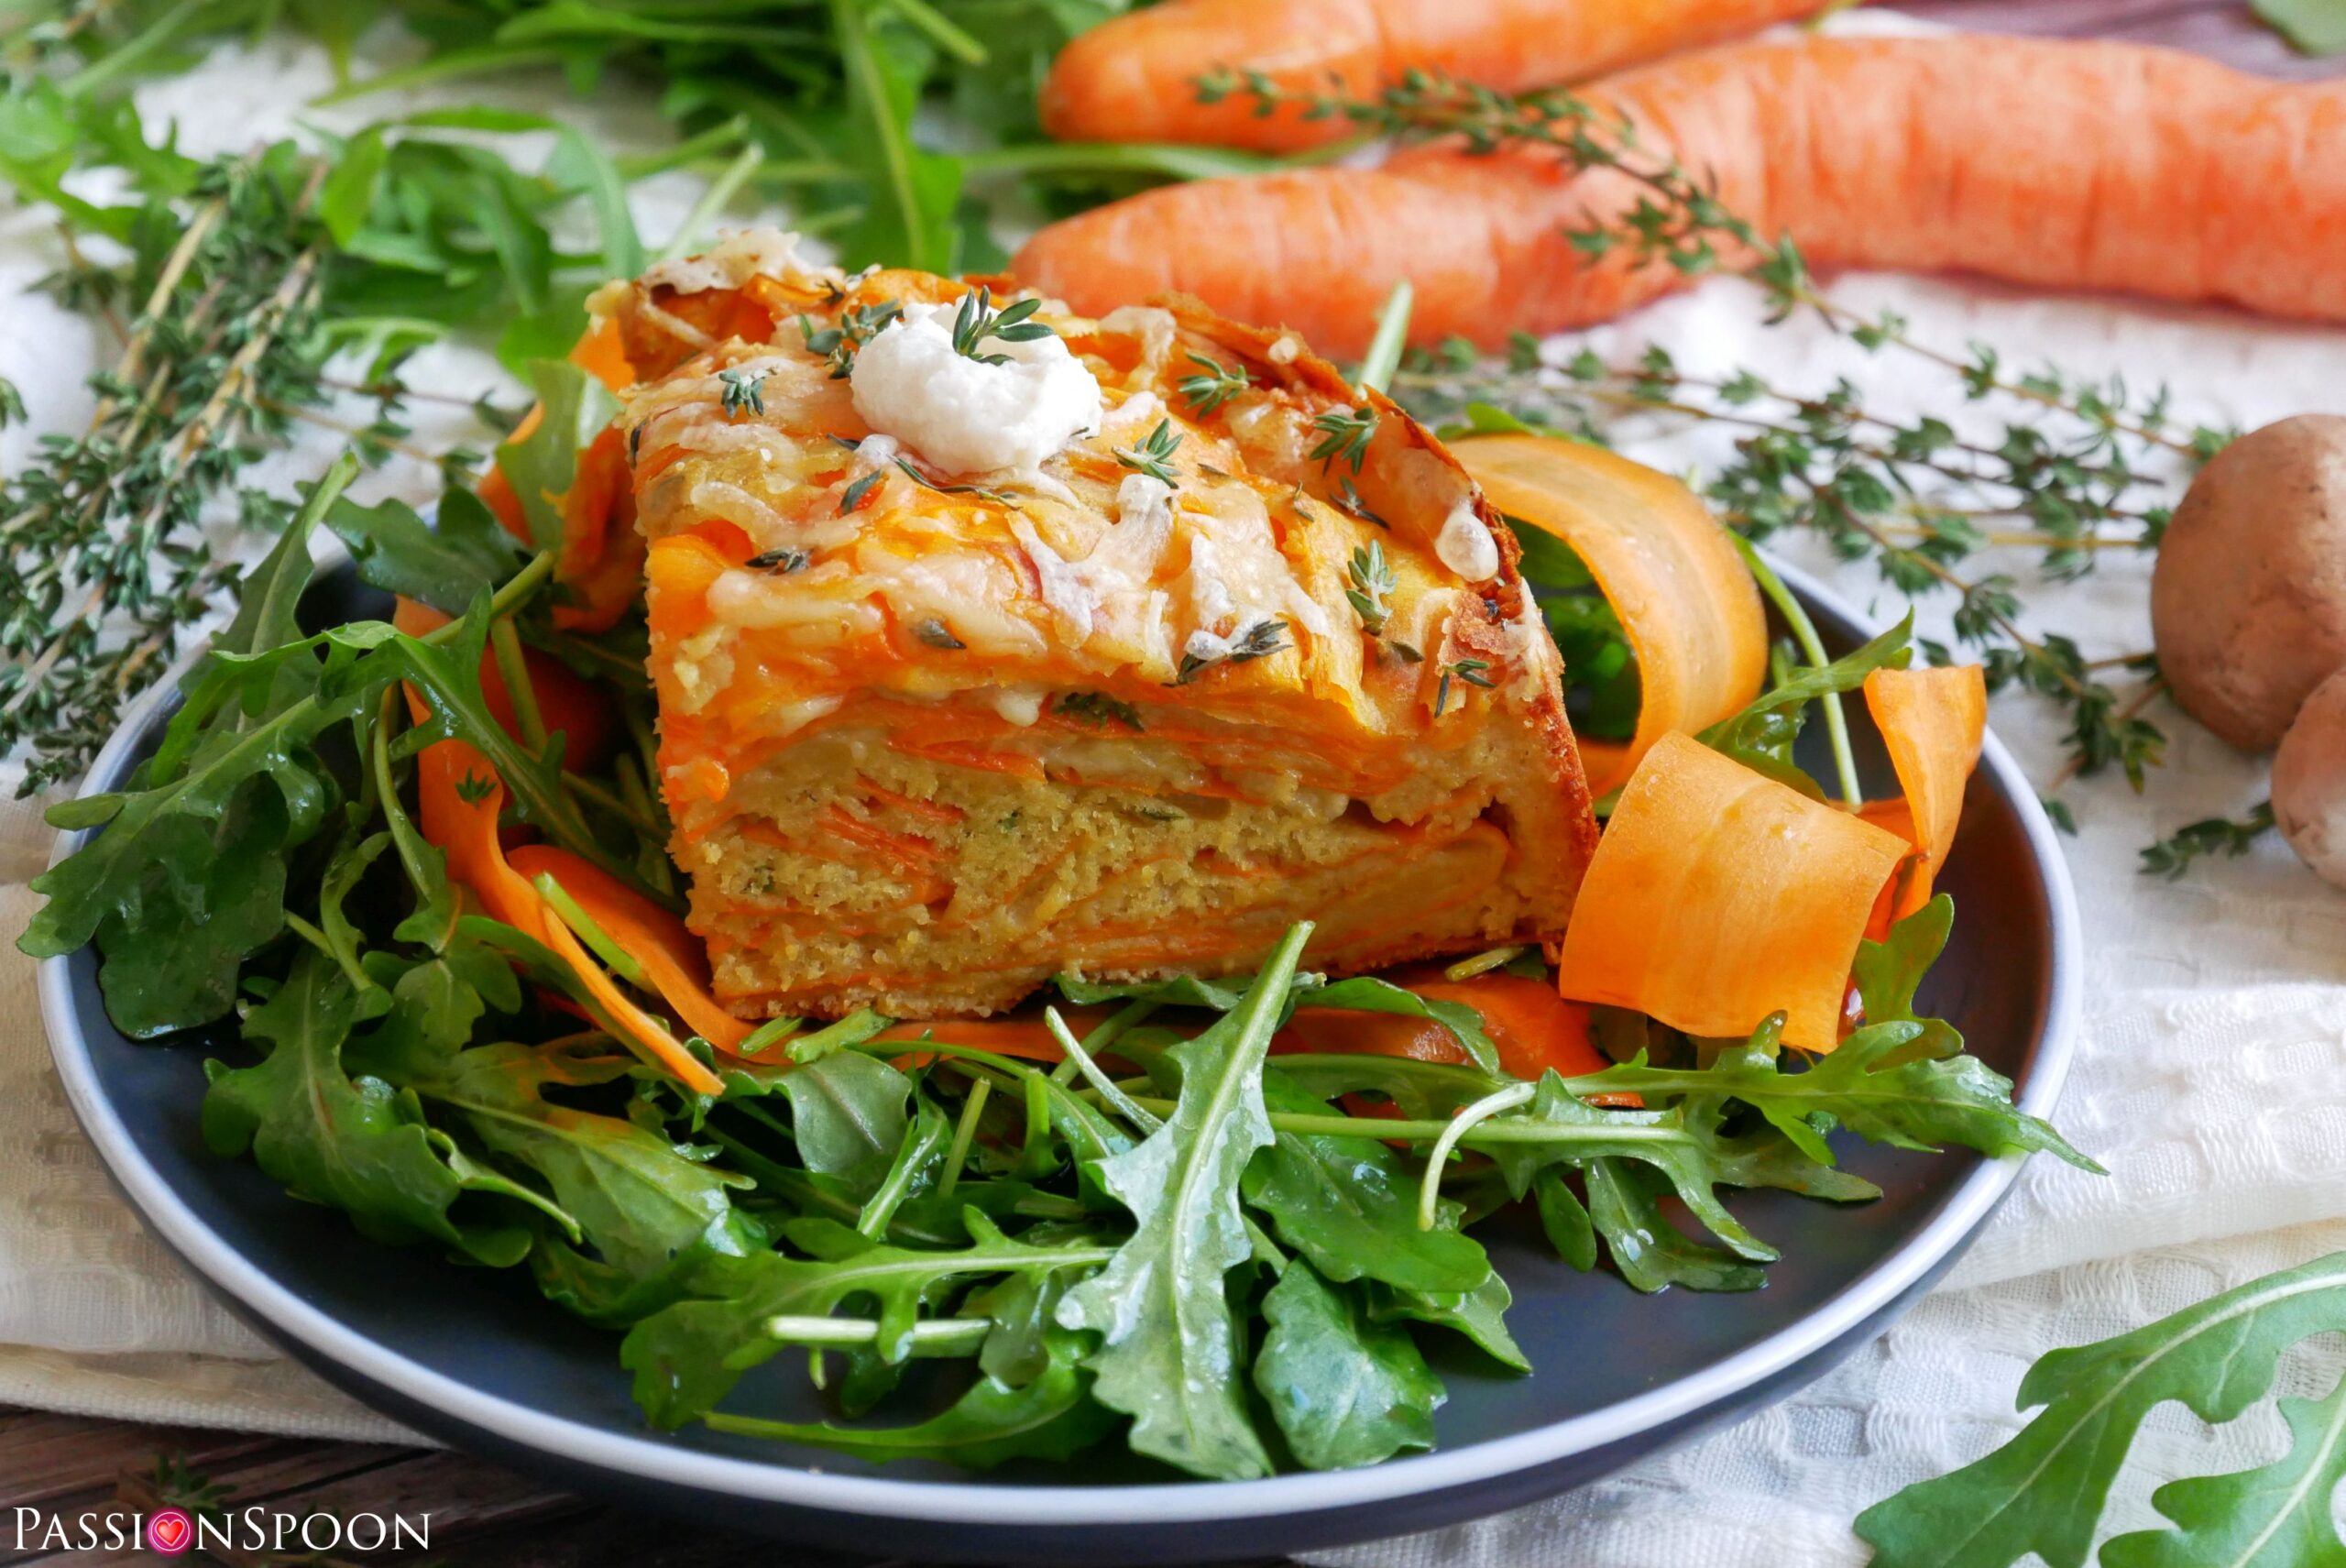 A Foraged Savory Vegetable Cake for a Vegetarian Easter - food to glow